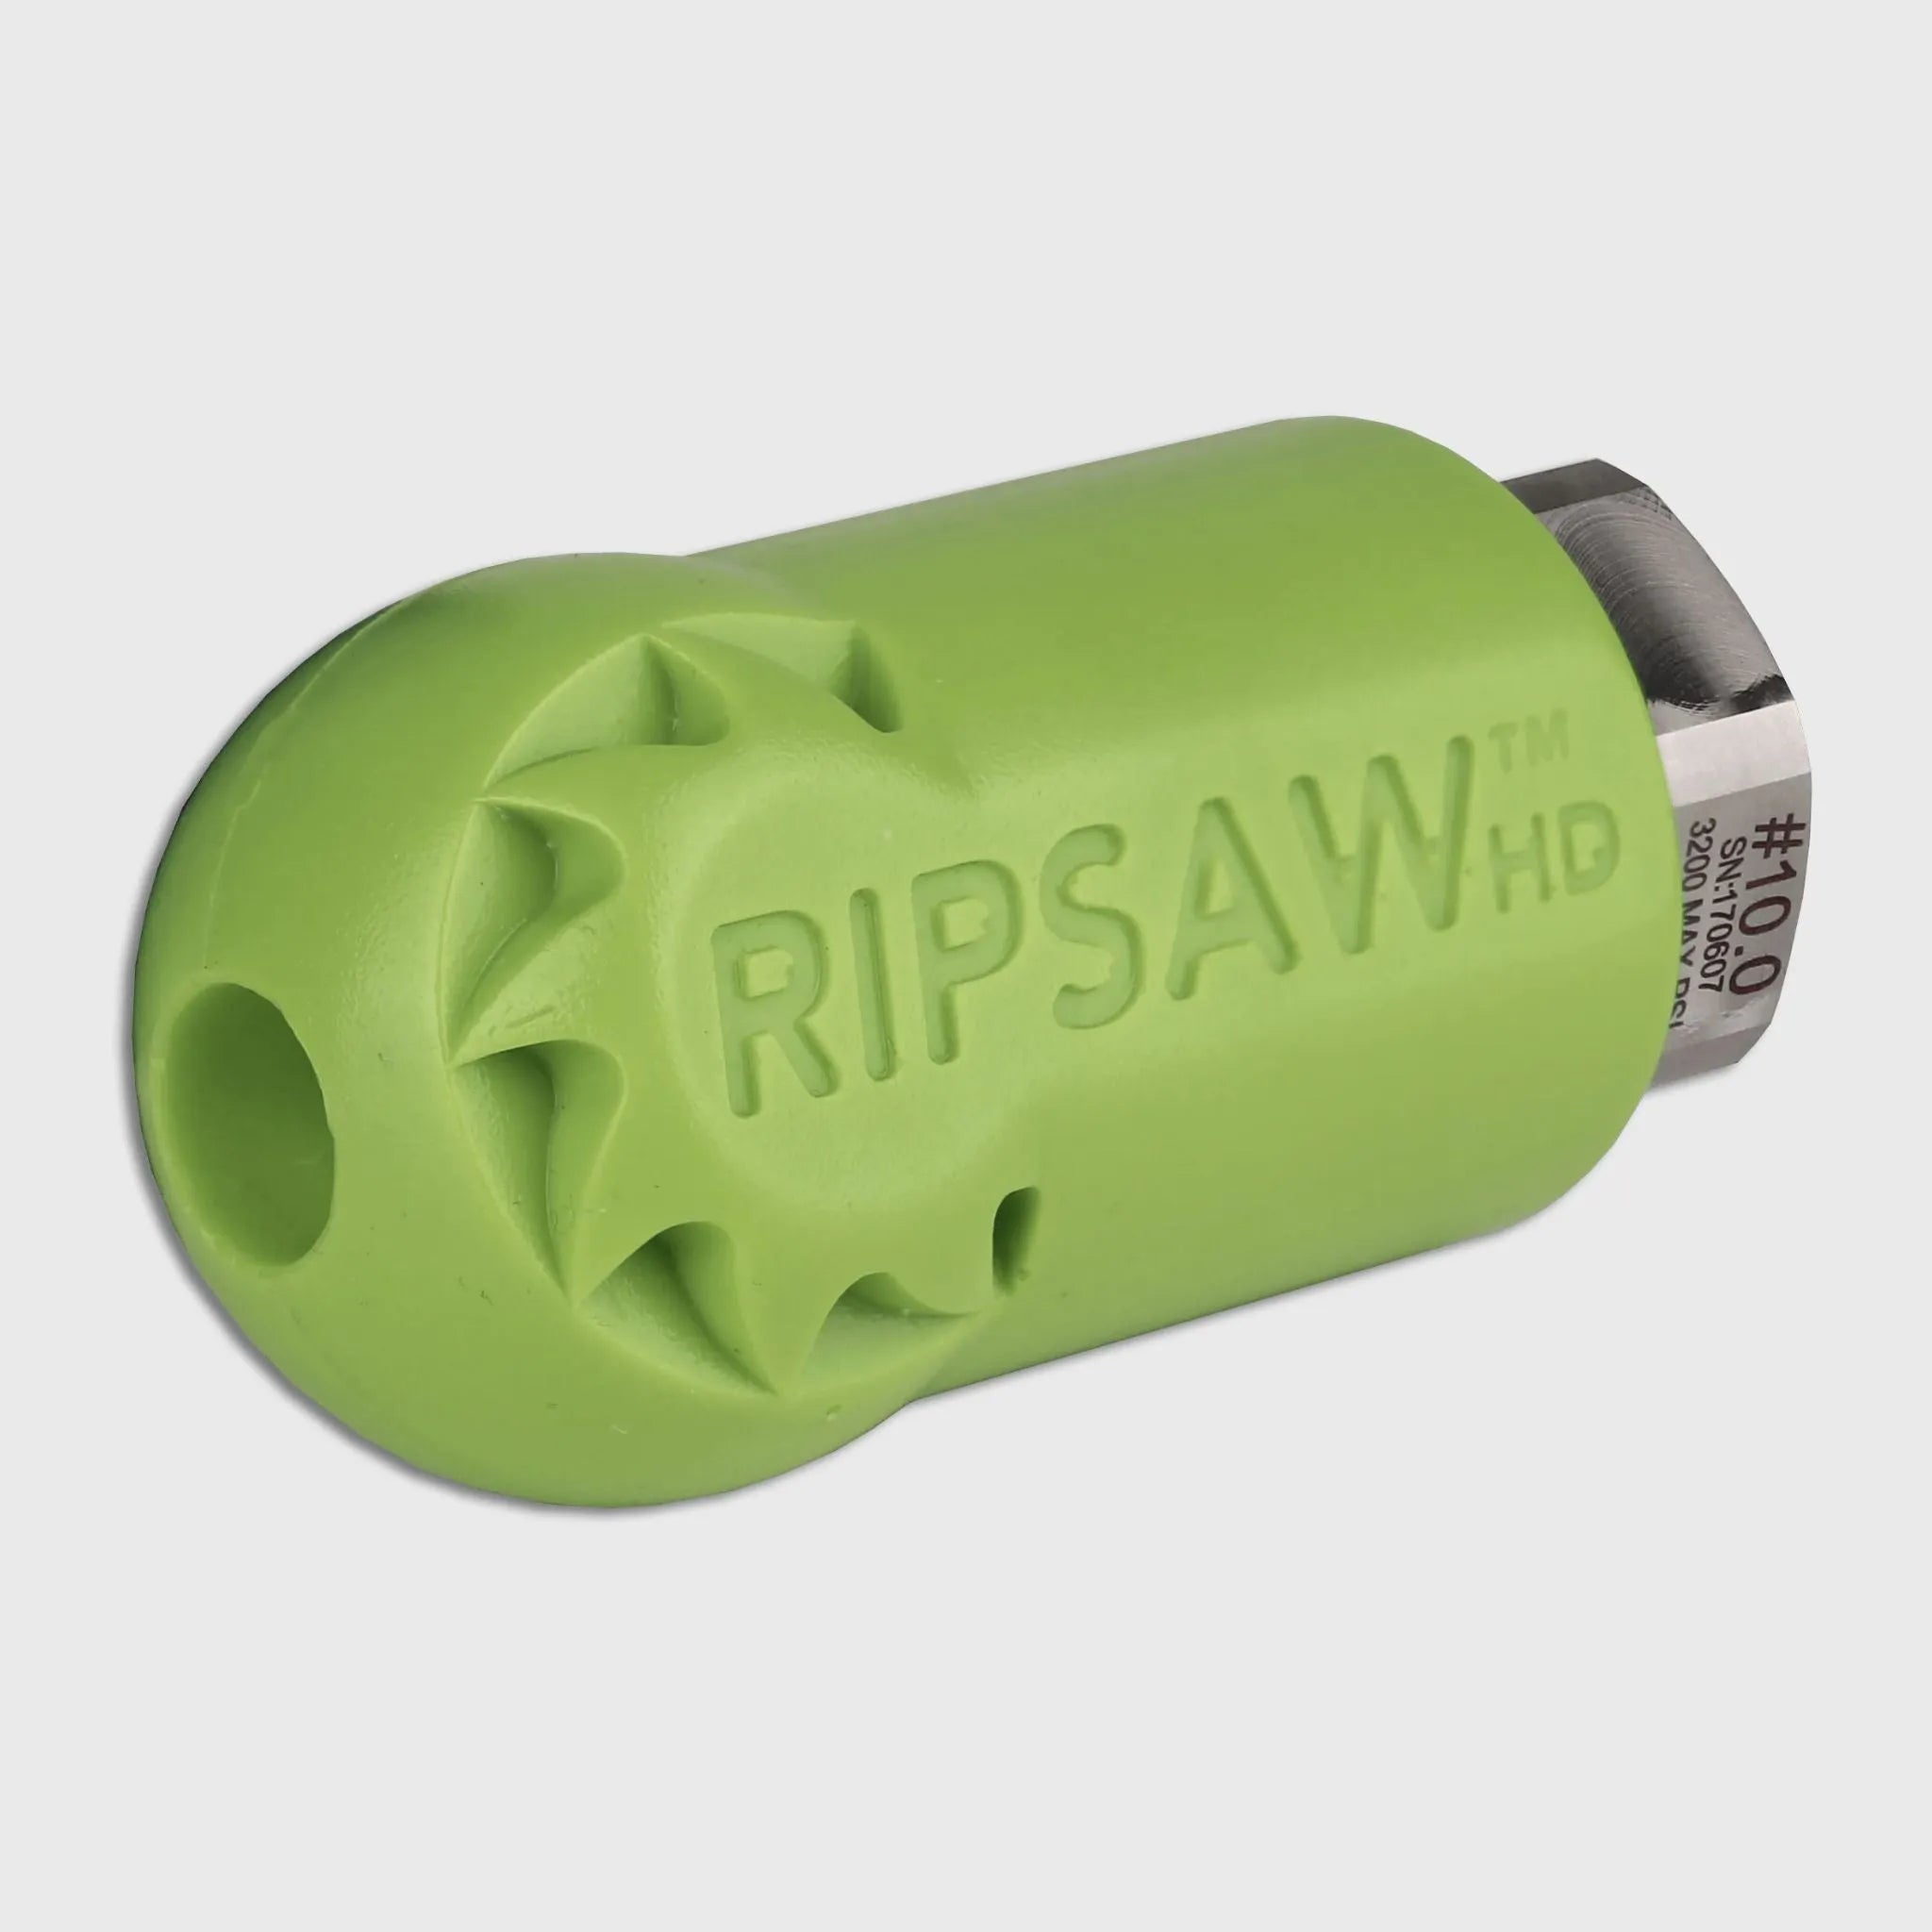 Ripsaw ™ Rotating Hydro-Excavation Nozzle #3, #4, #5, #6, #8, #10, #12 - Hydro-Max Jetter